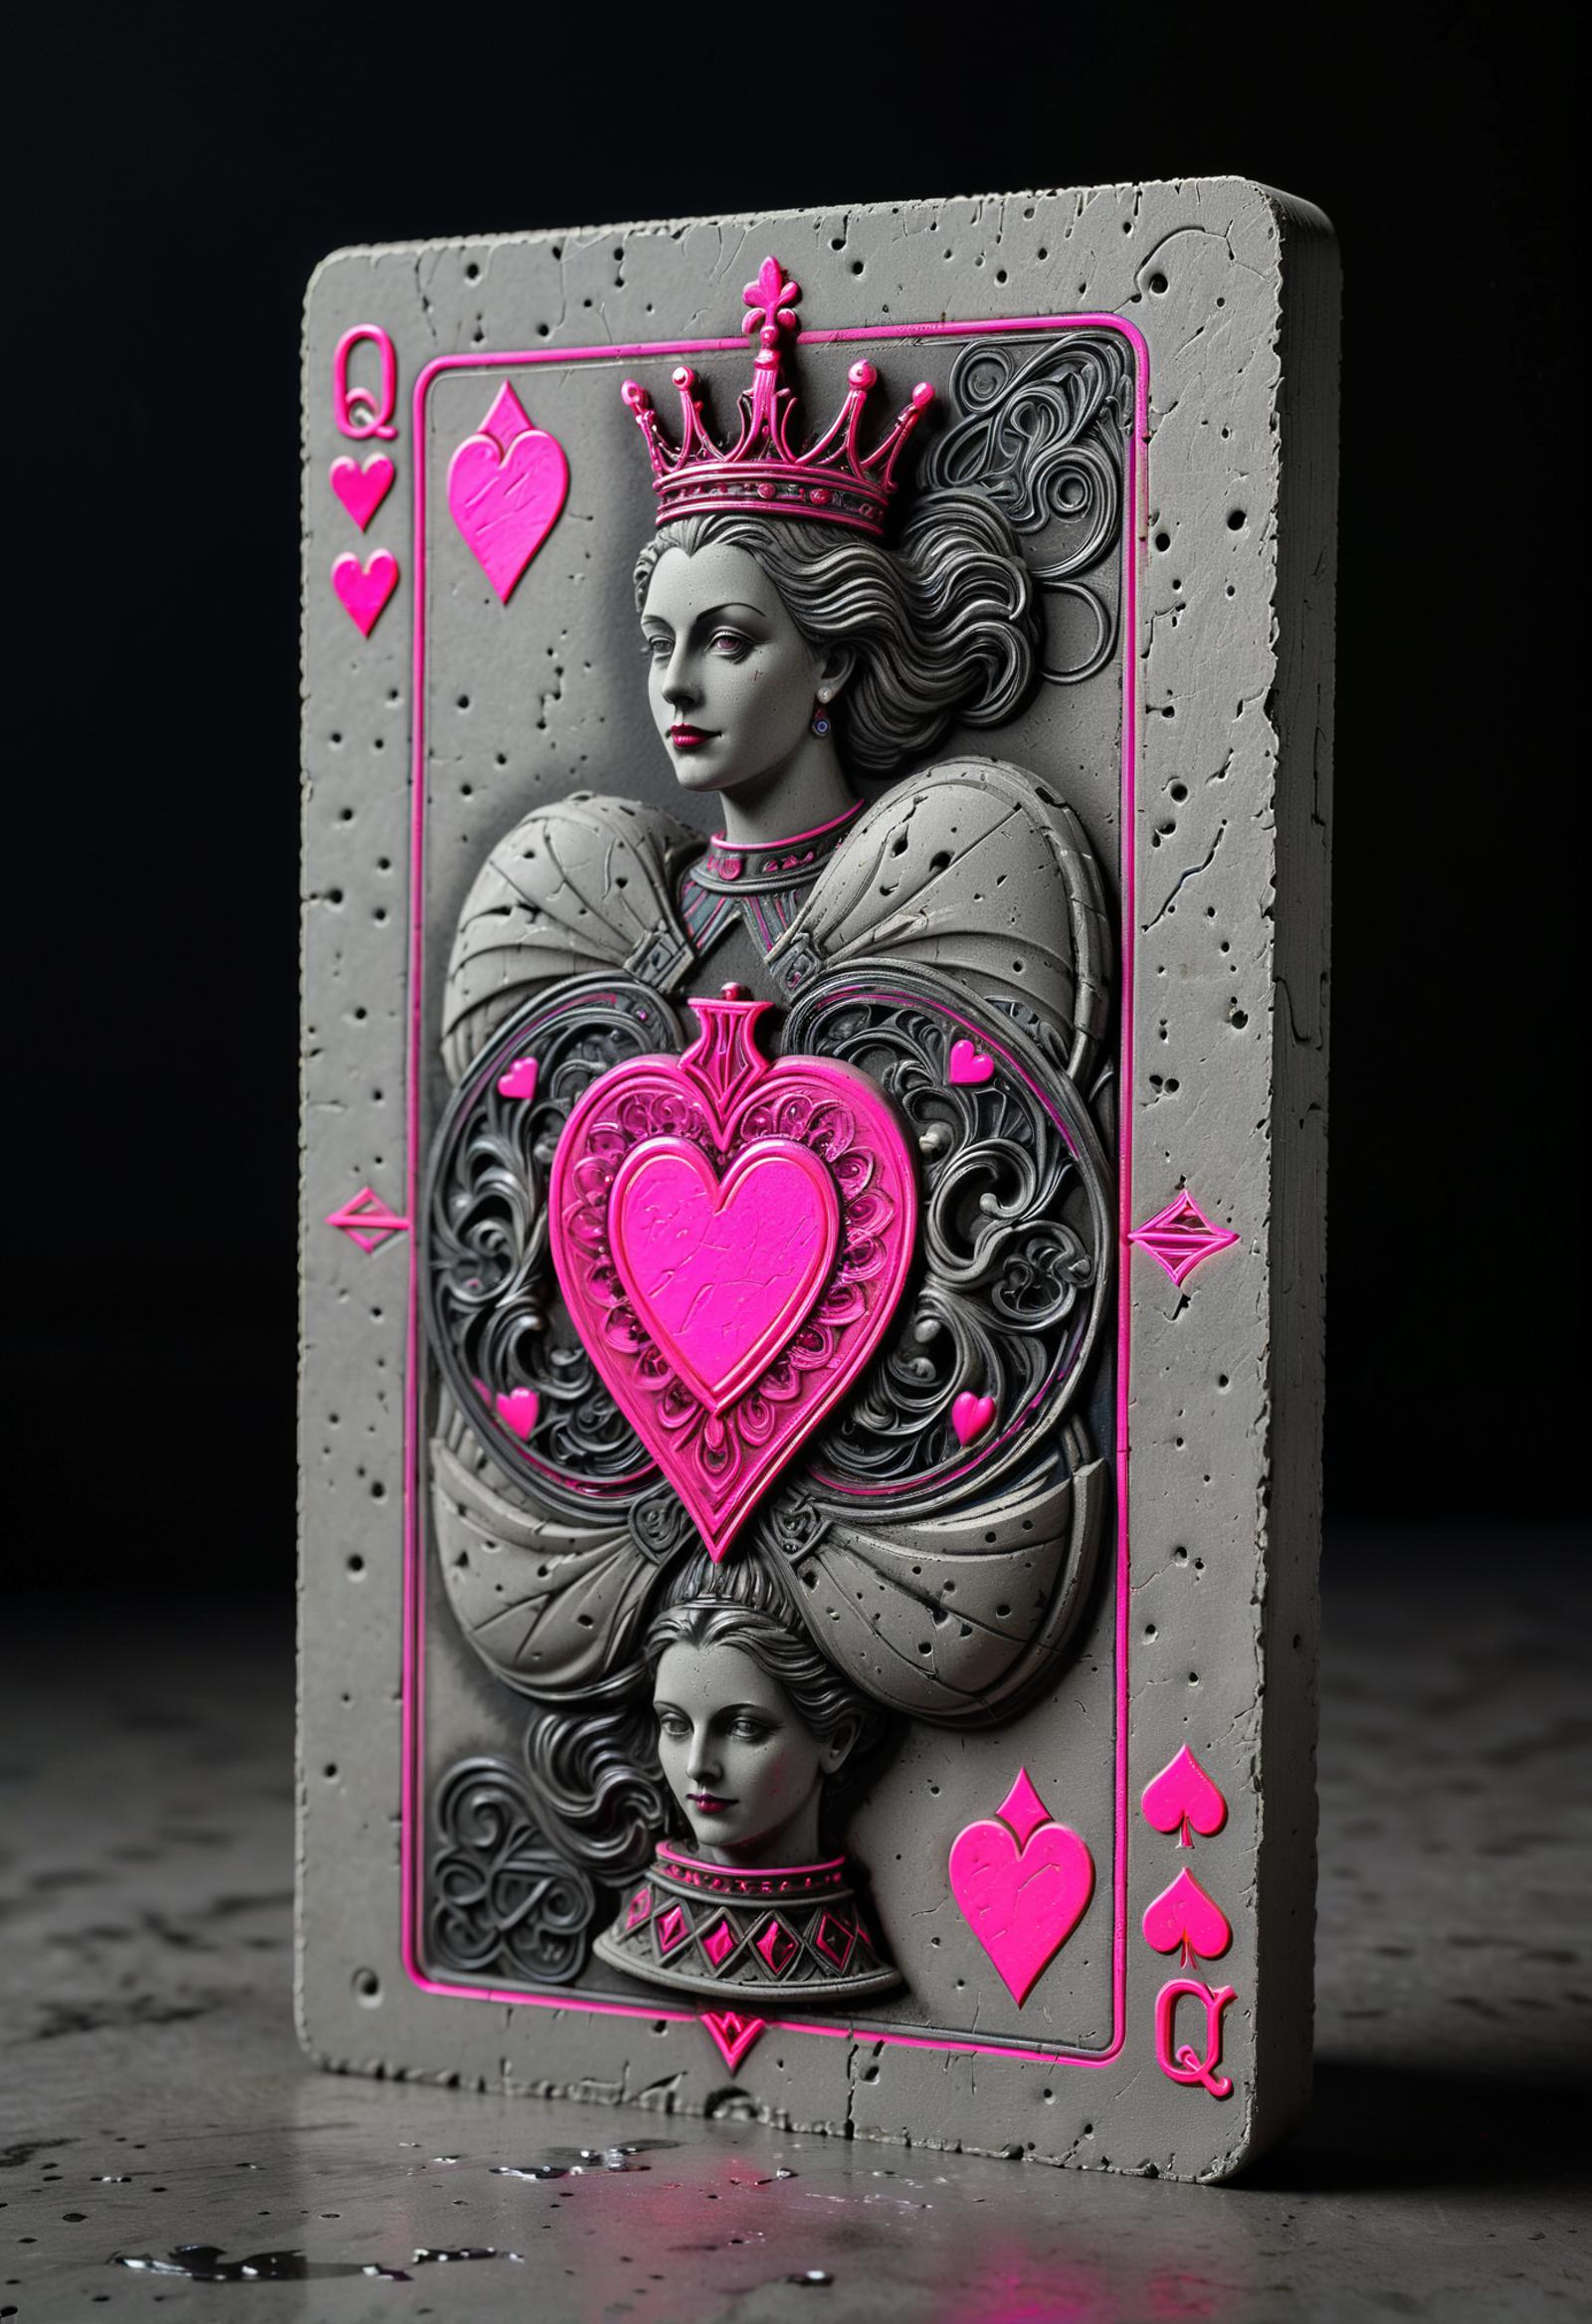 A card with a pink heart on it that says "queen of hearts".